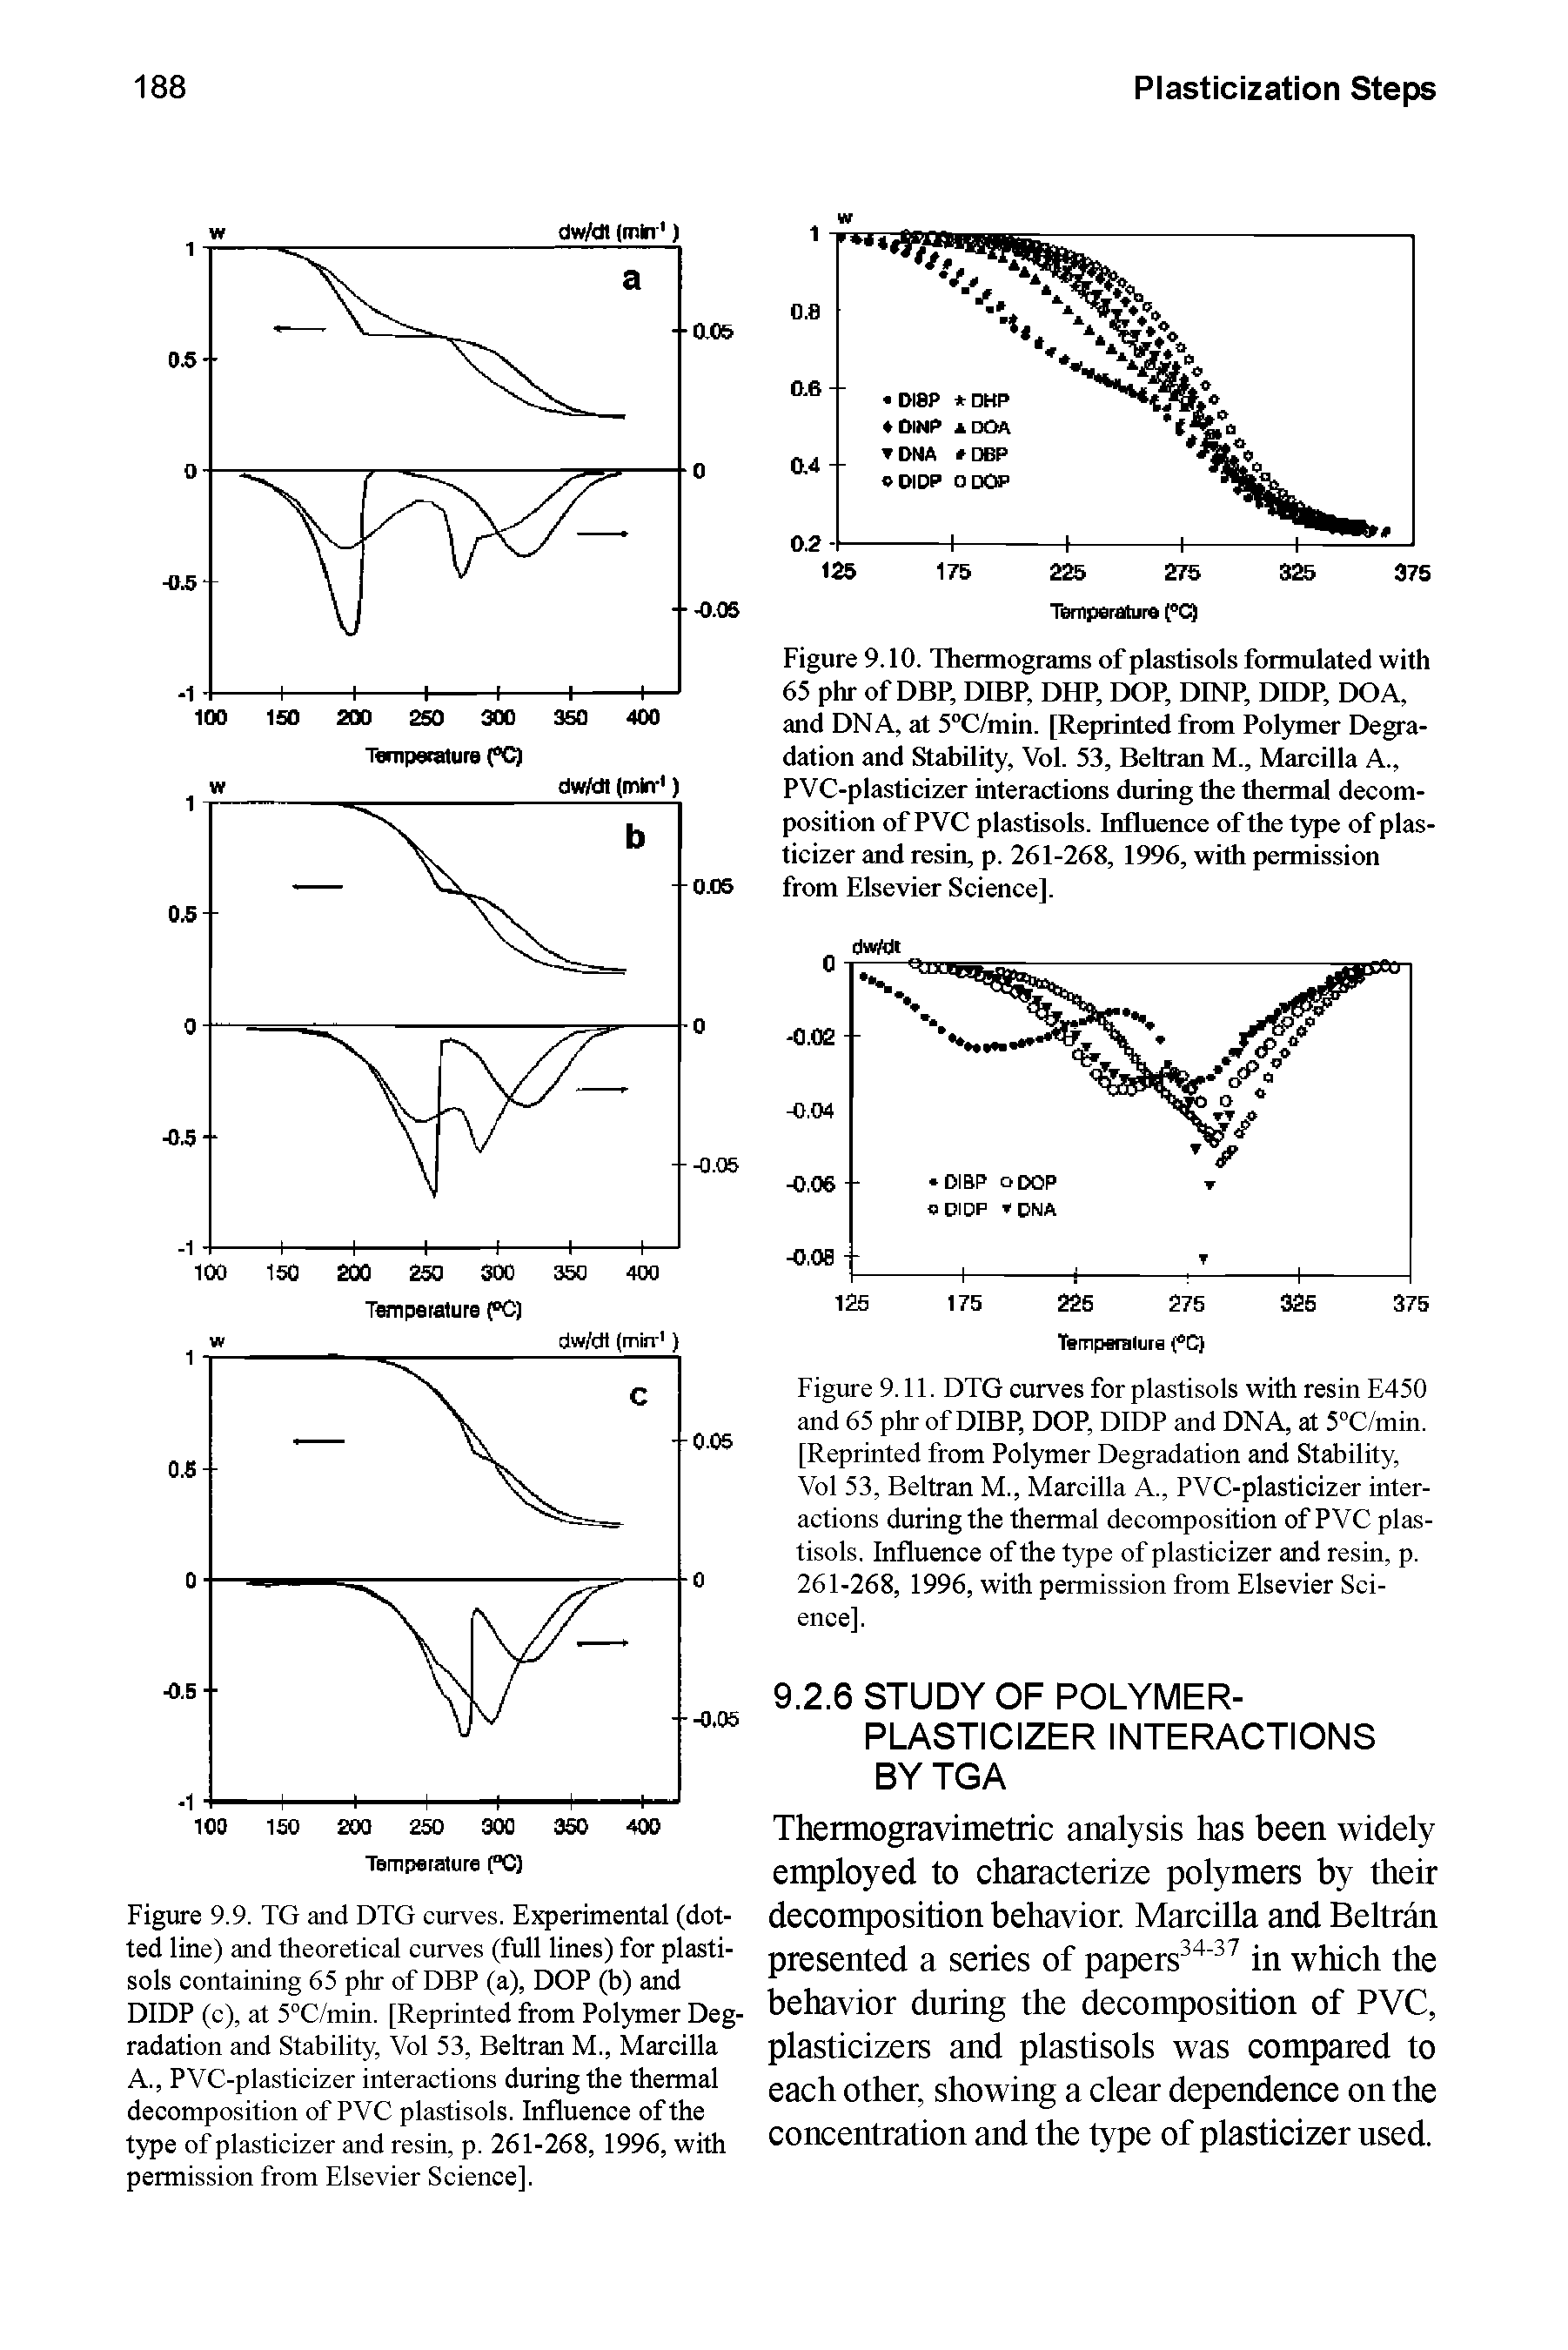 Figure 9.9. TG and DTG curves. Experimental (dotted line) and theoretical curves (full lines) for plasti-sols containing 65 phr of DBF (a), DOP (b) and DIDP (c), at 5°C/min. [Reprinted from Polymer Degradation and Stability, Vol 53, Beltran M., Marcilla A., PVC-plasticizer interactions during the thermal decomposition of PVC plastisols. Influence of the type of plasticizer and resin, p. 261-268, 1996, with permission from Elsevier Science],...